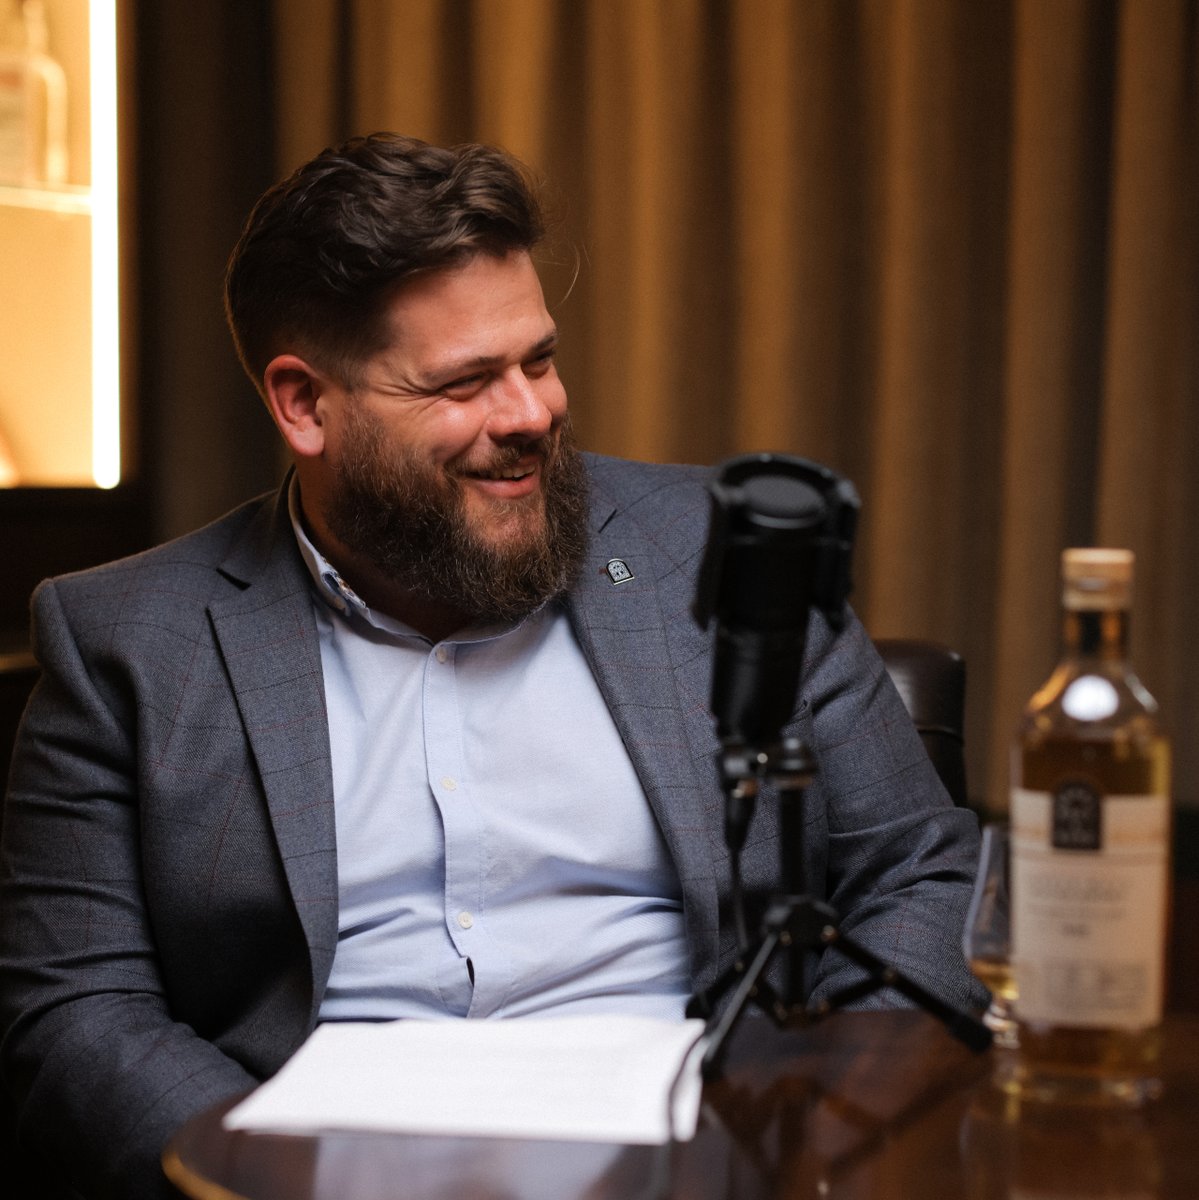 In Episode 4 of Drinking Well, we're turning our attention to another side of our business entirely: spirits. Listen as Barbara Drew MW chats with Joe Whittaker, our Global Brand Ambassador, who lives and breathes spirits every day: bit.ly/43C67yi